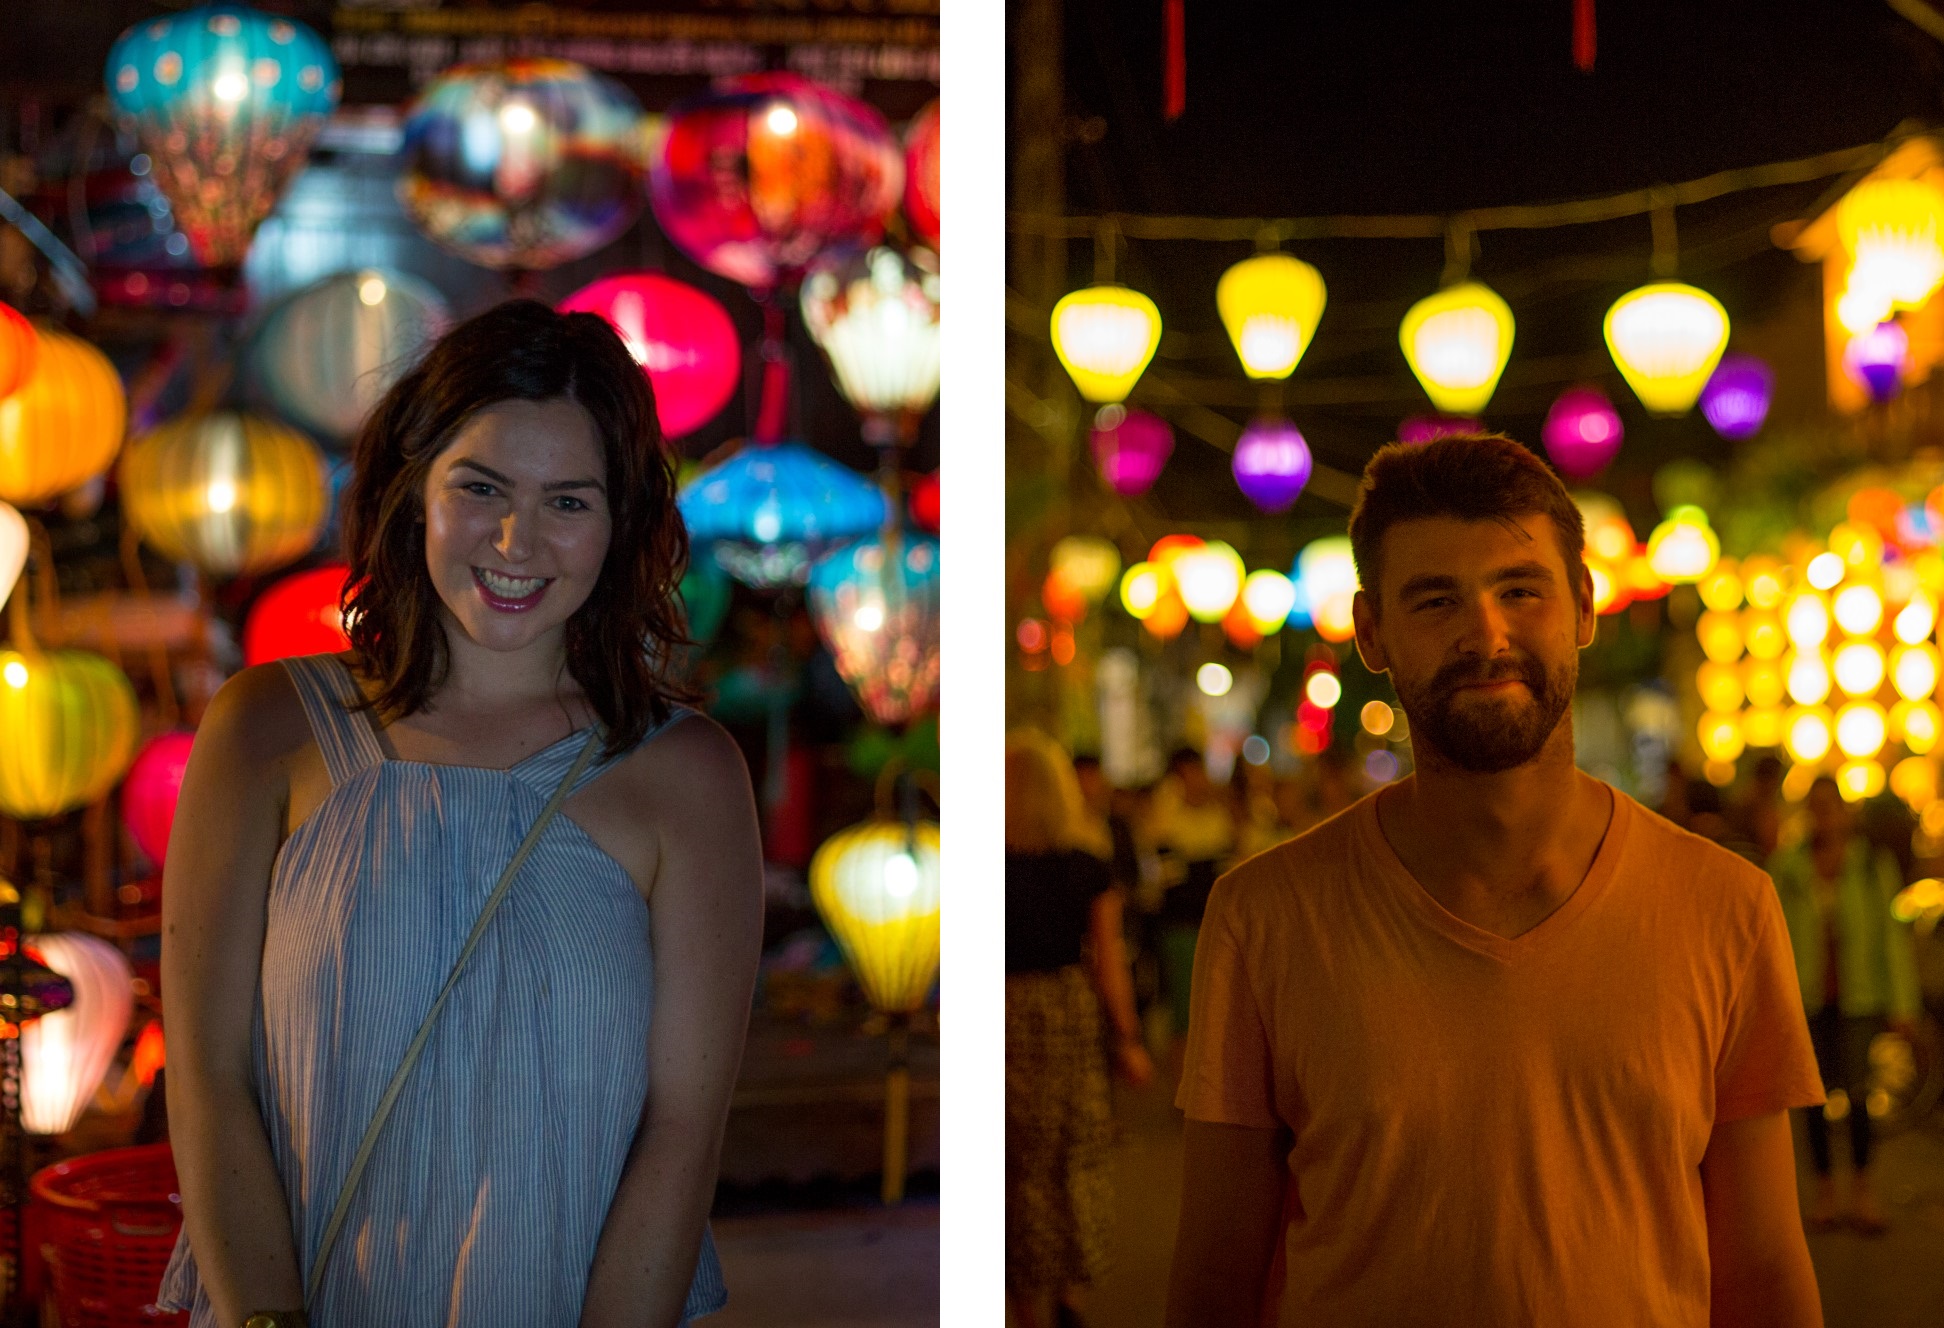 Woman and man backlit by colorful lanterns at night market.